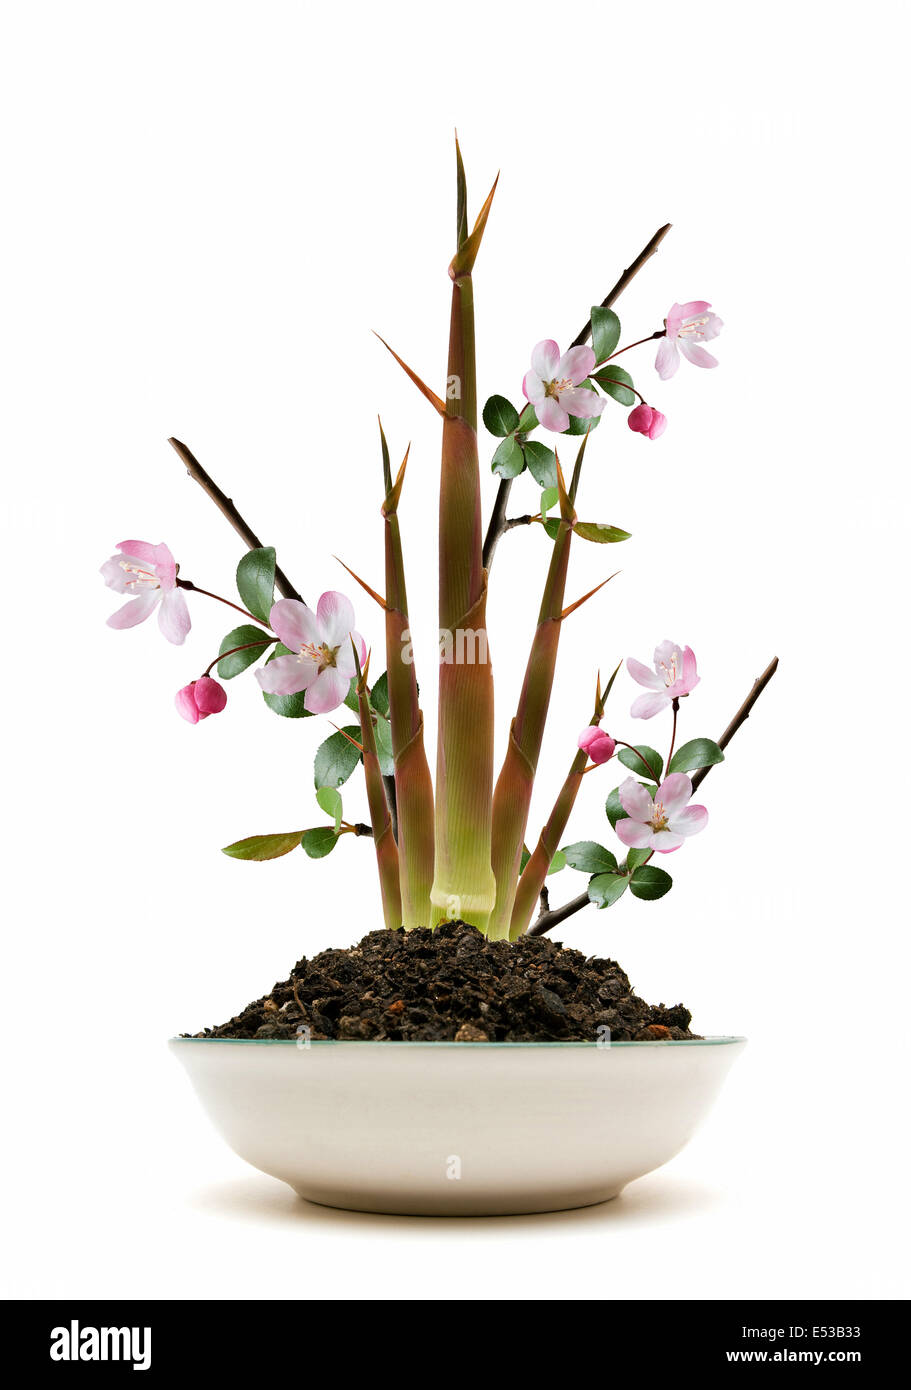 Peach blossom and bamboo in spring Stock Photo